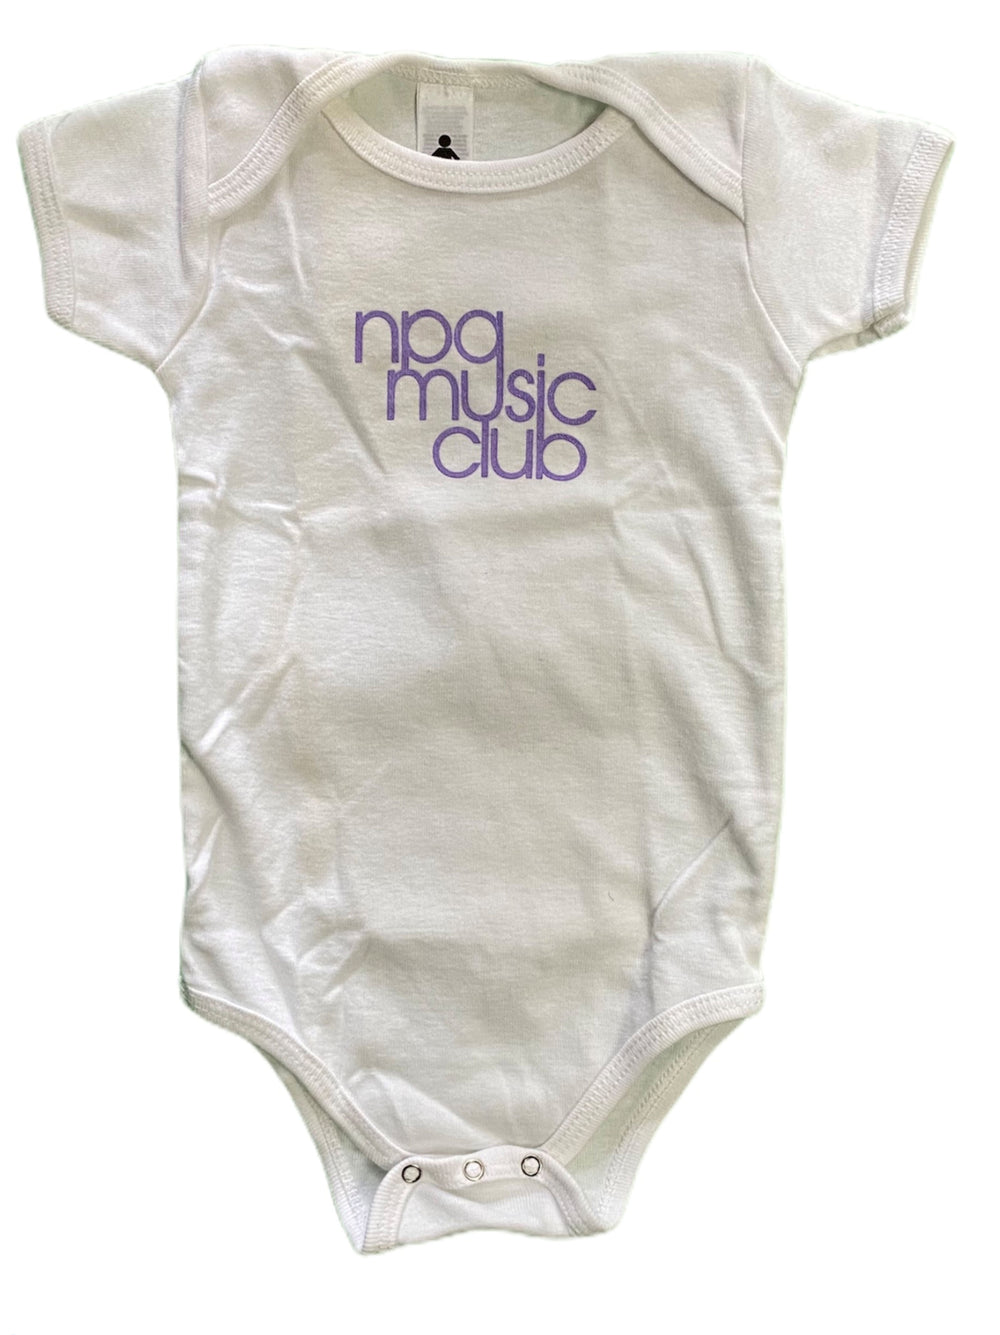 Prince – NPG Music Club Original Vintage Baby Body Suit From The Vault Shirt Kids